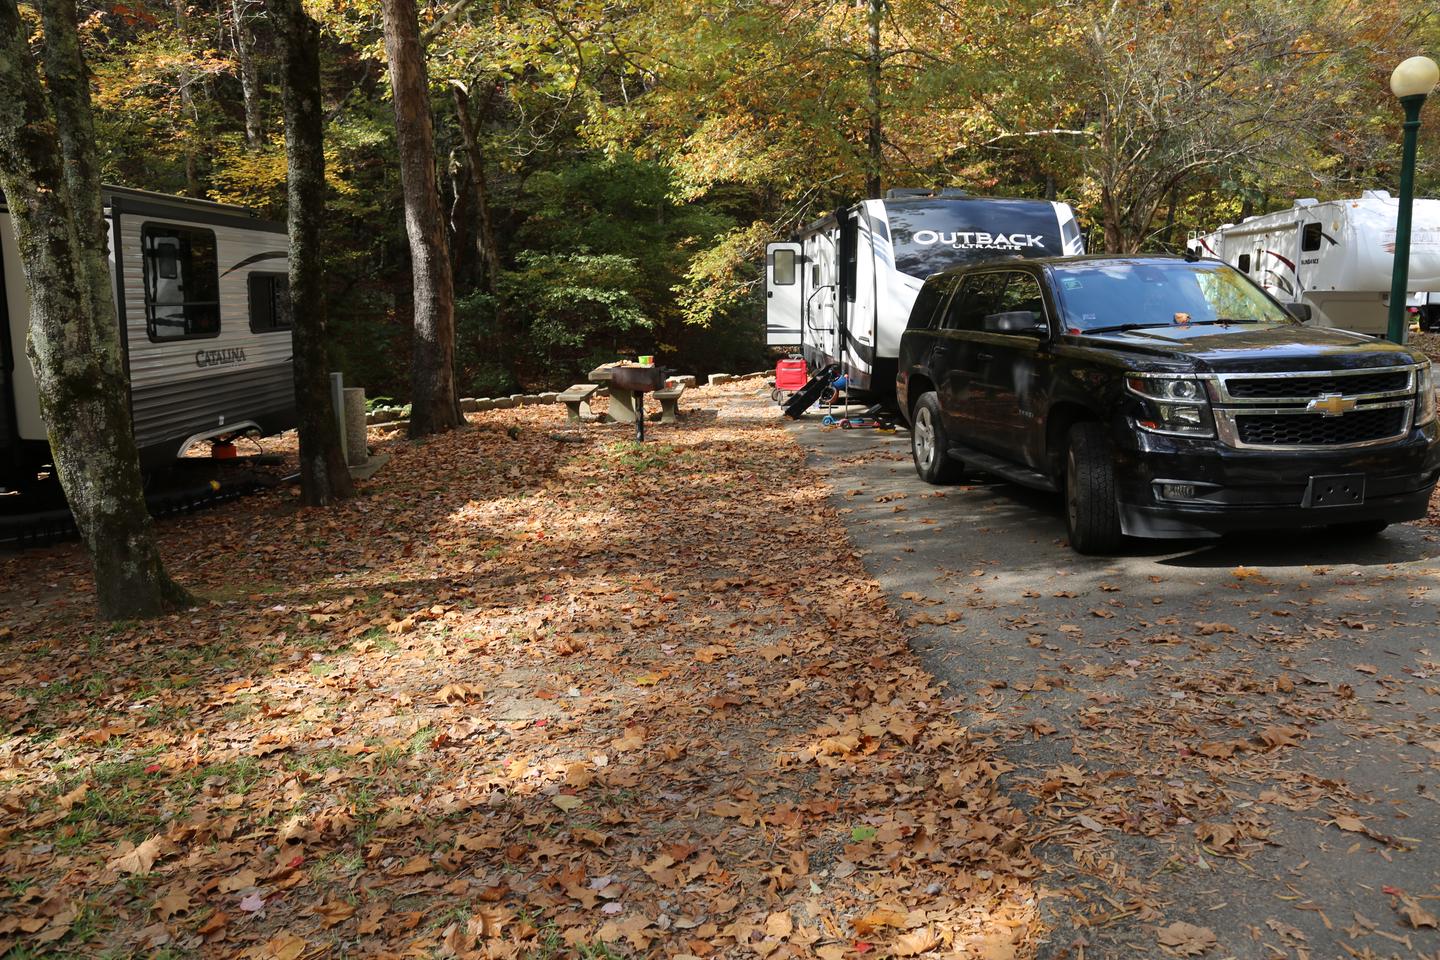 Camper with SUV in front parked on a paved pad with a grill and picnic table to the left, and surrounded by treesCampsite 37